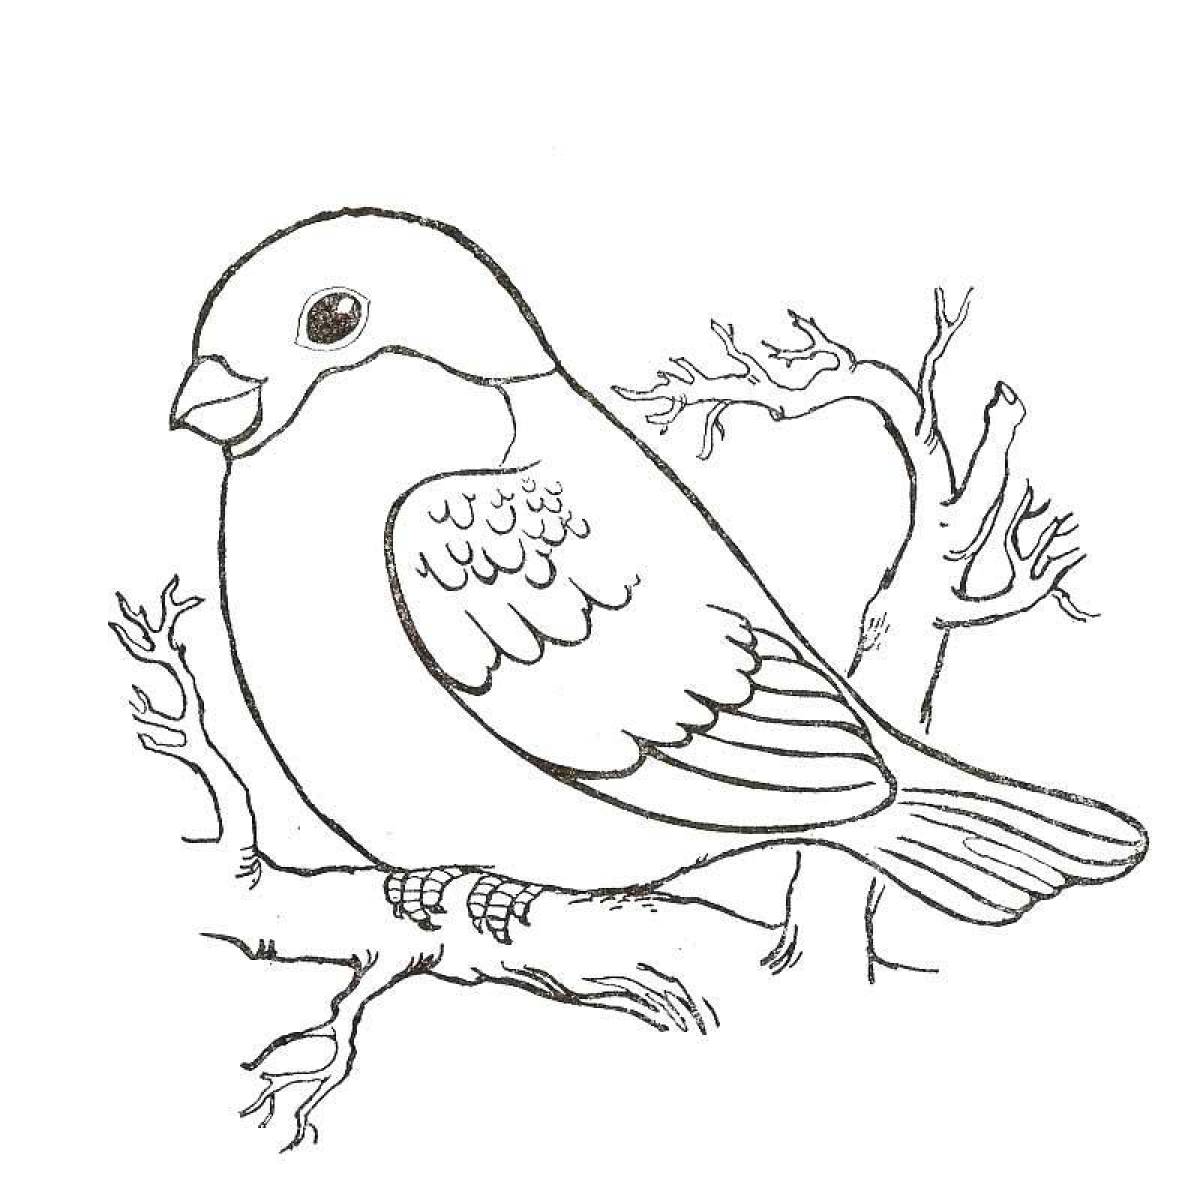 Coloring pages for children with playful wintering birds